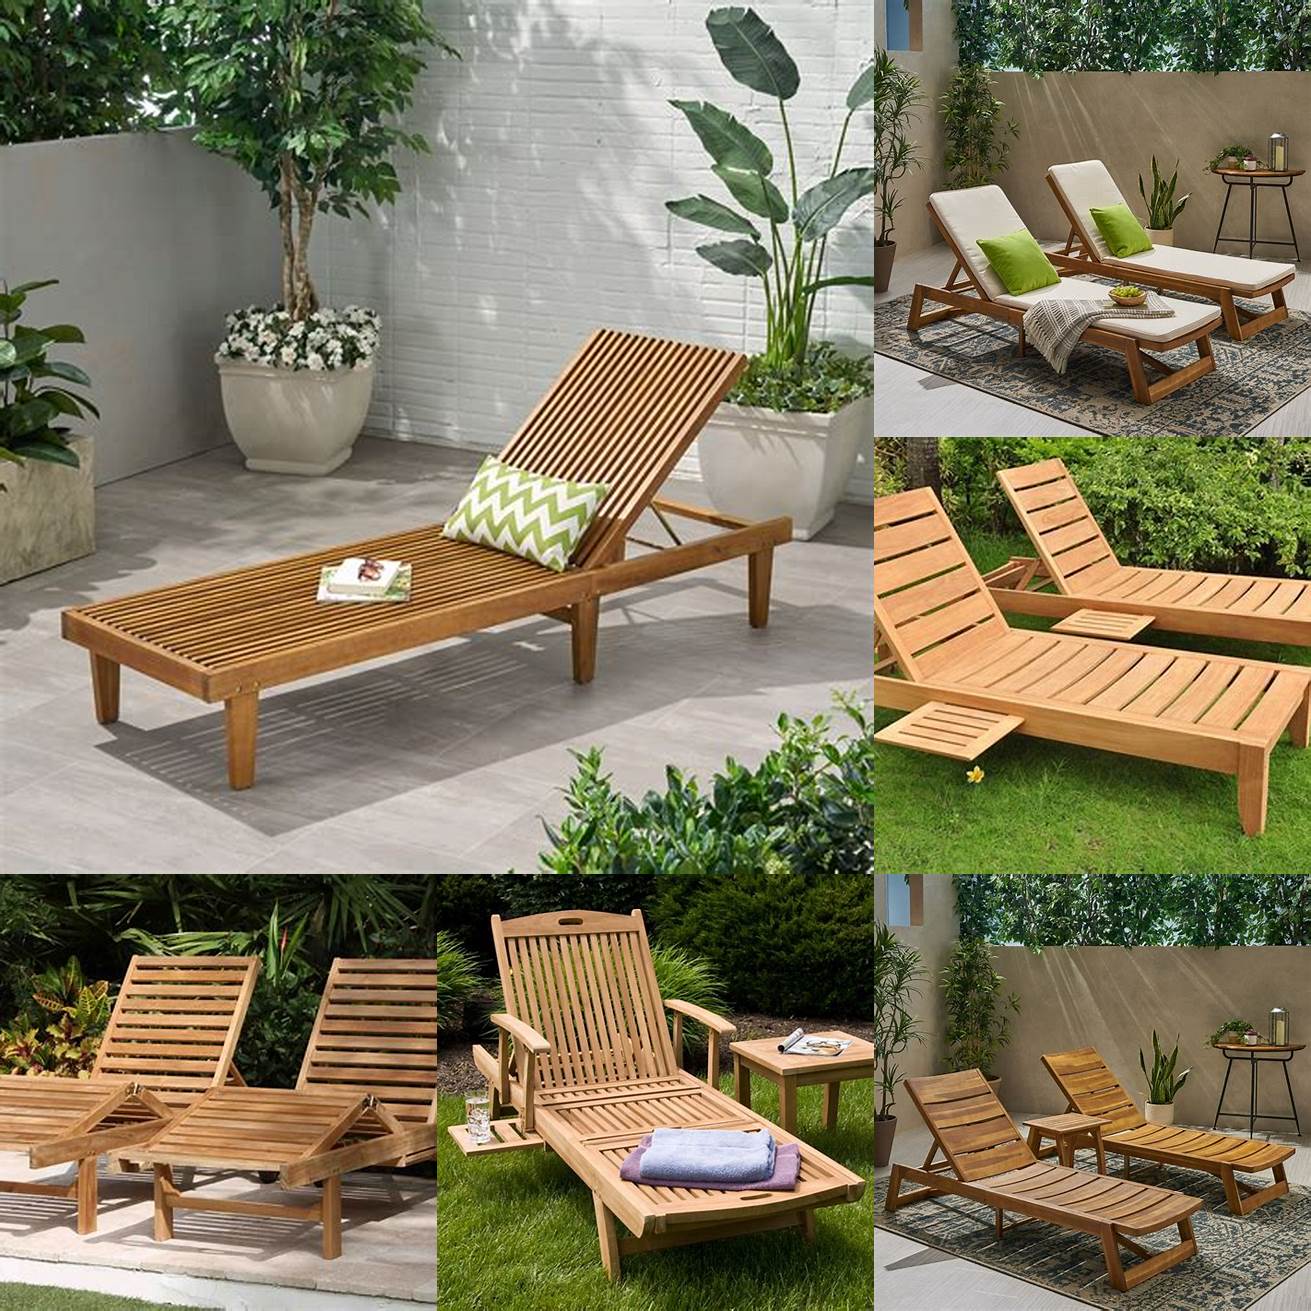 A teak outdoor chaise lounge